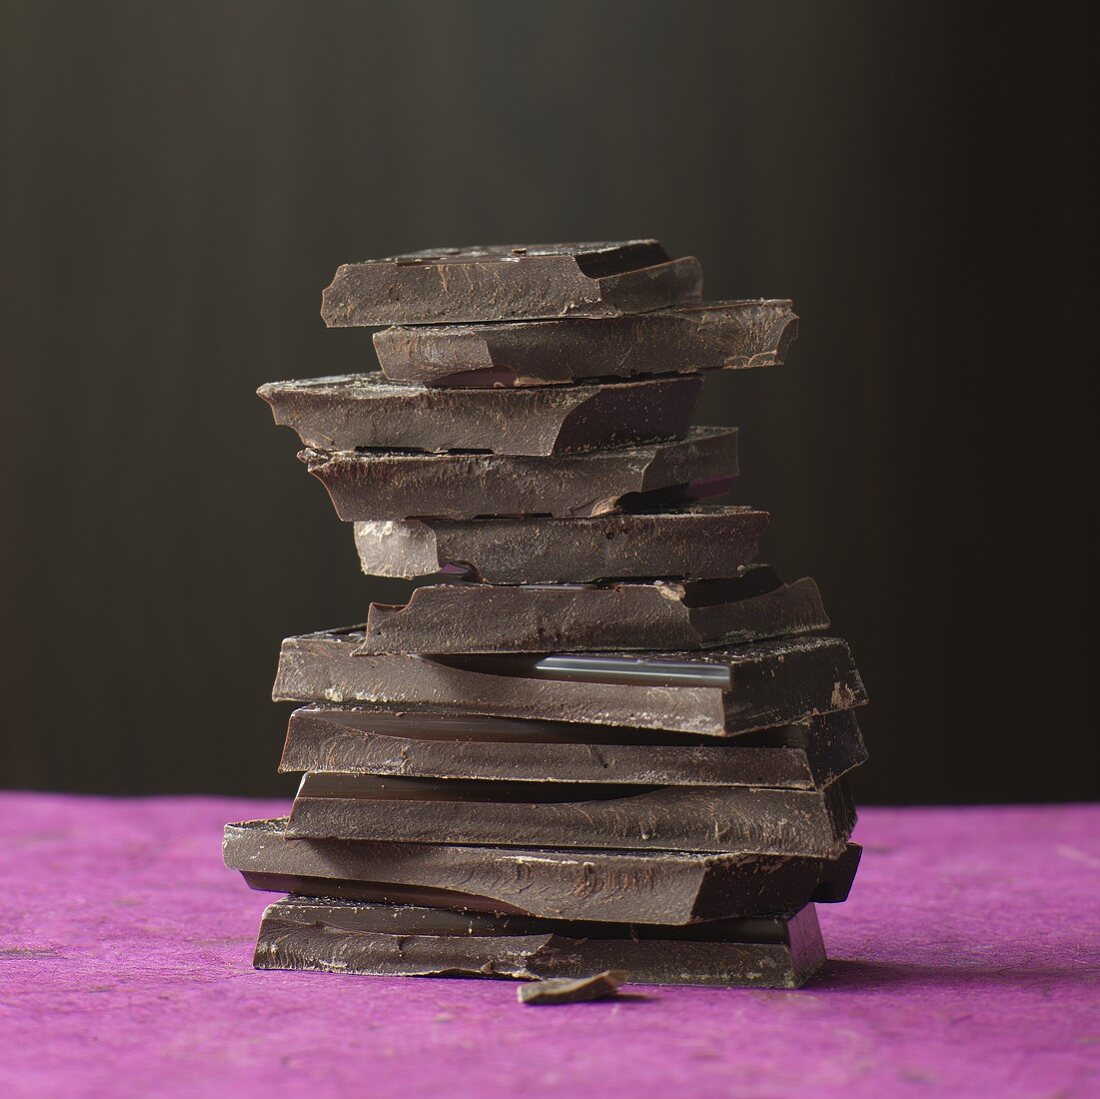 Pieces of chocolate stacked on a pink colored surface